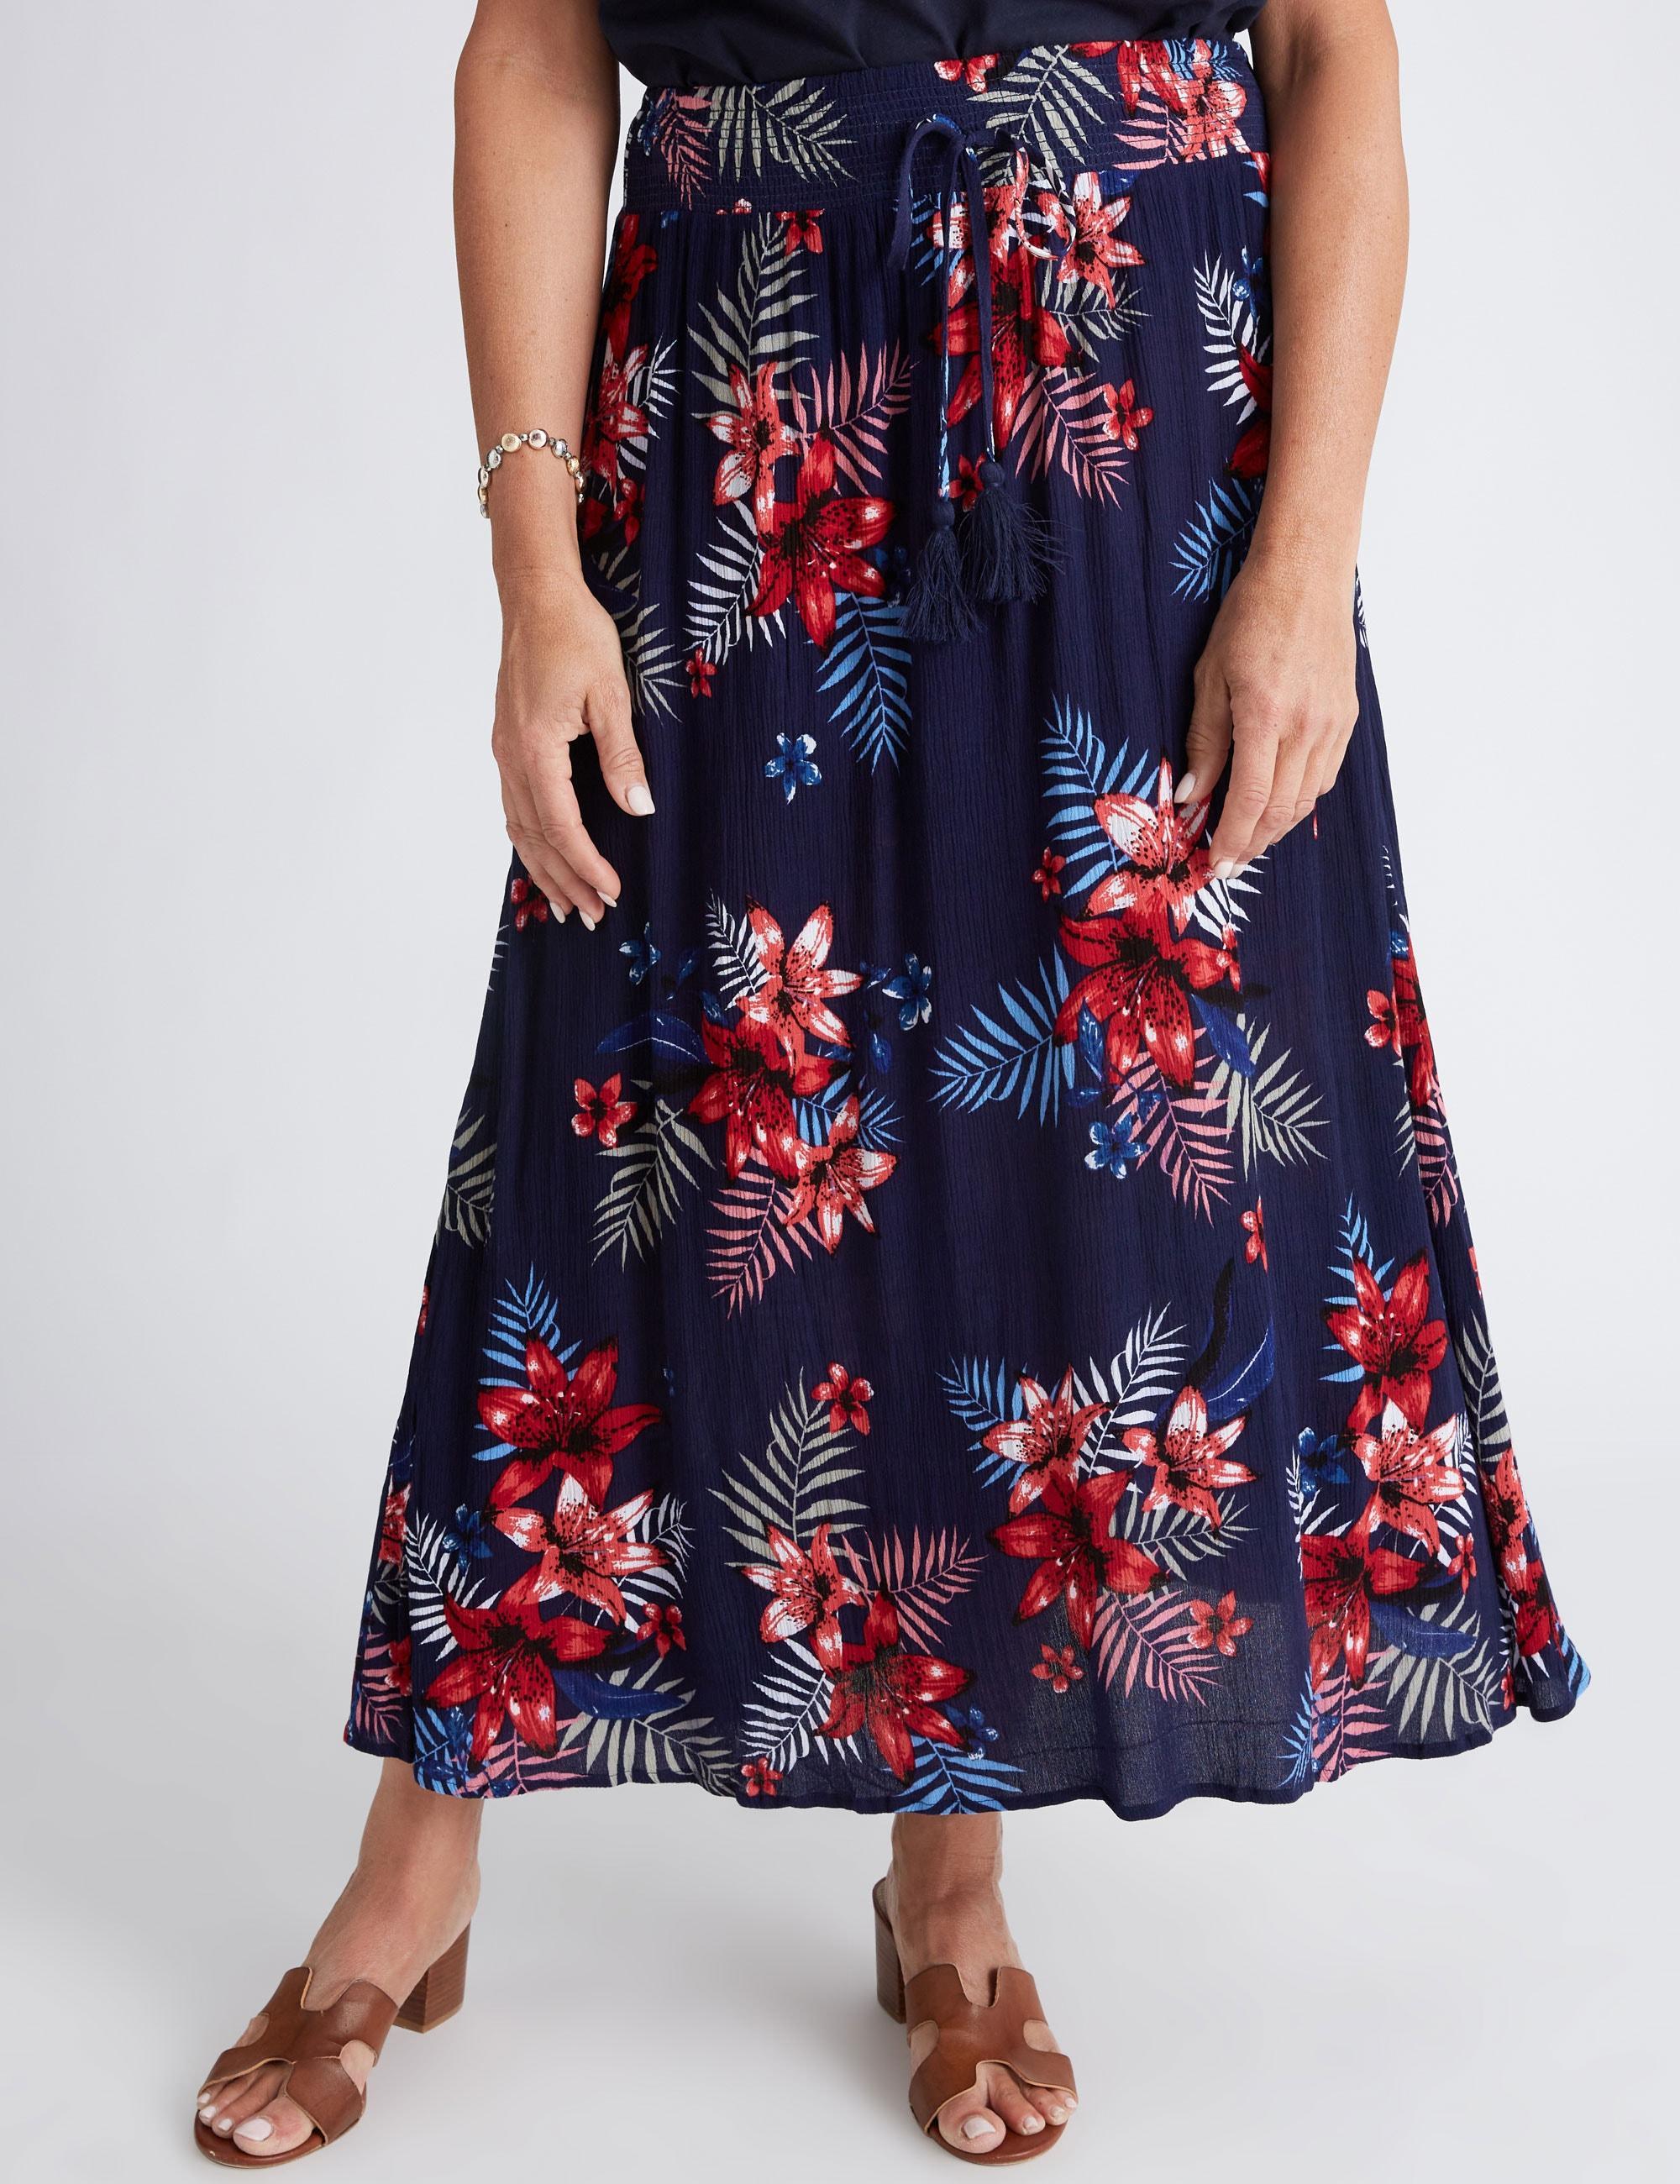 MILLERS - Womens Skirts - Maxi - Summer - Red - Floral - A Line - Work Clothes - Tropical - Relaxed Fit - Prined Crinkle - Long - Casual Fashion